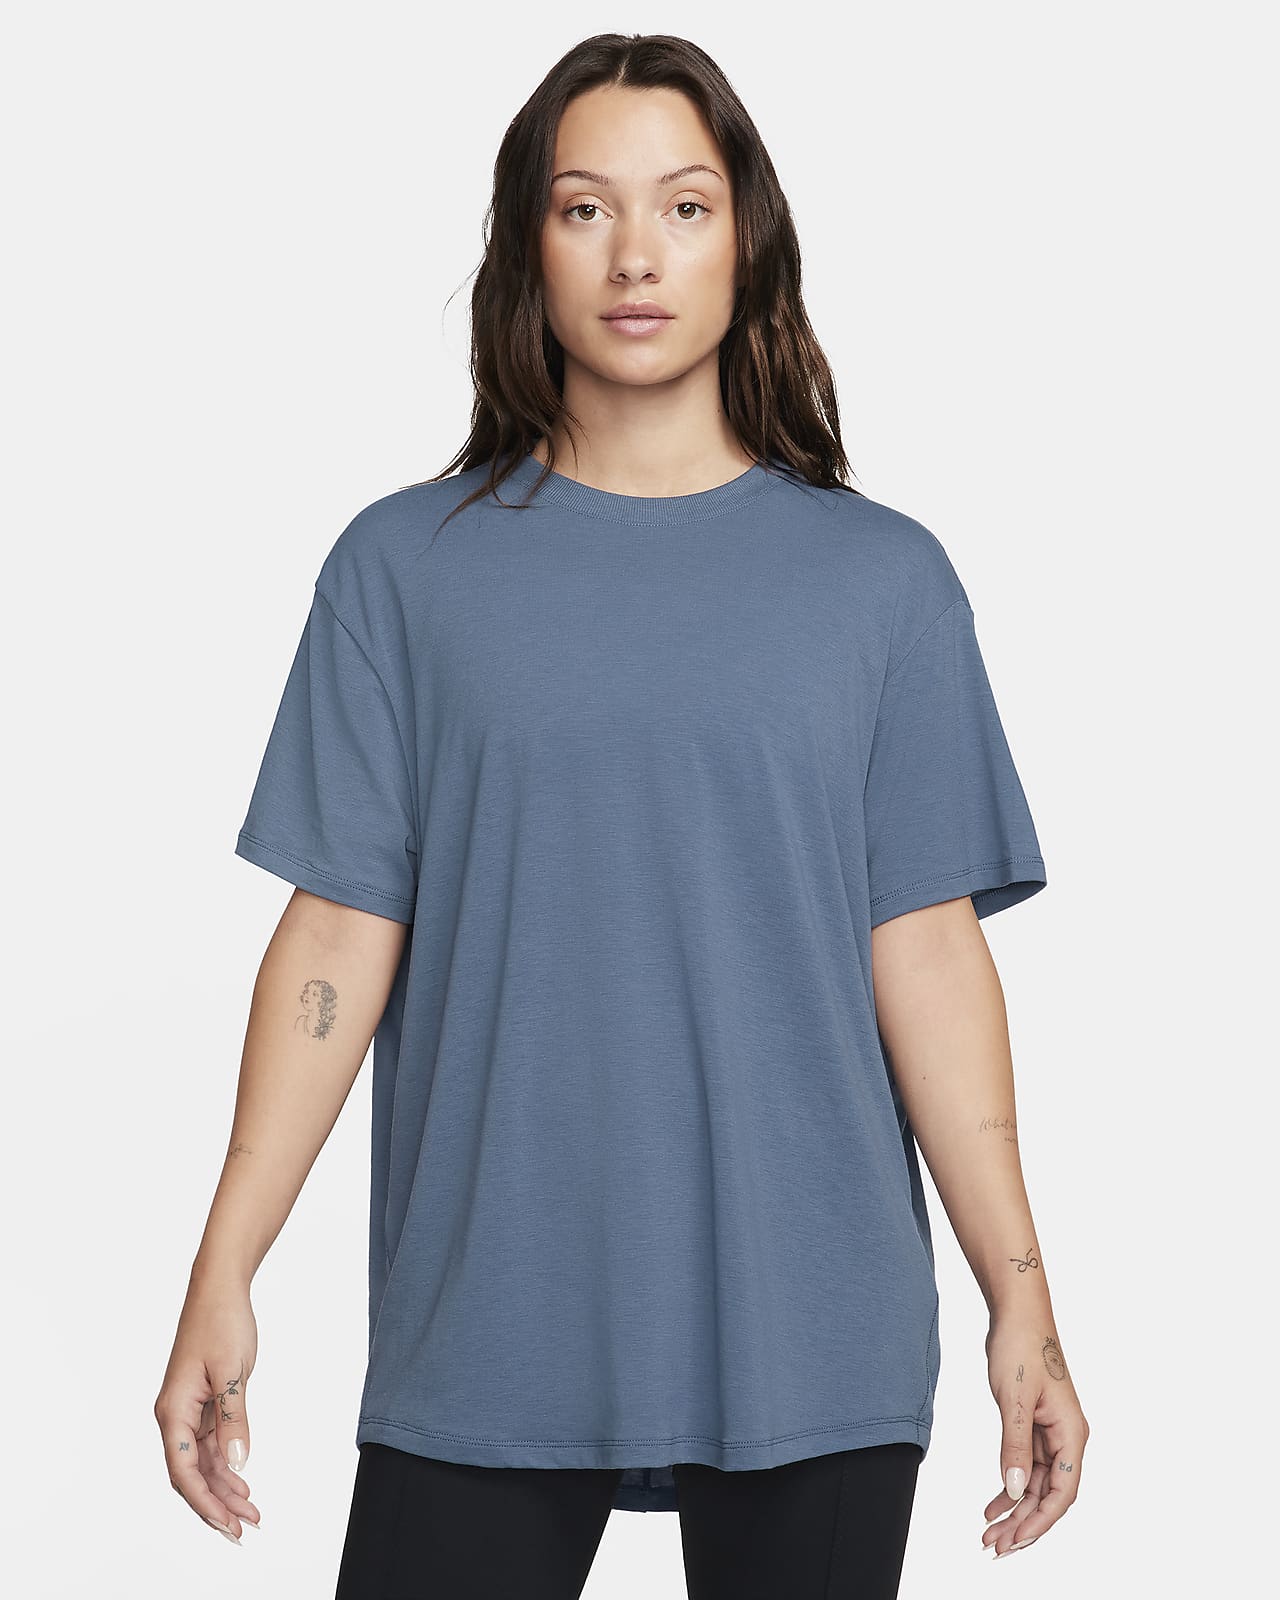 Nike One Relaxed Women's Dri-FIT Short-Sleeve Top. Nike CA